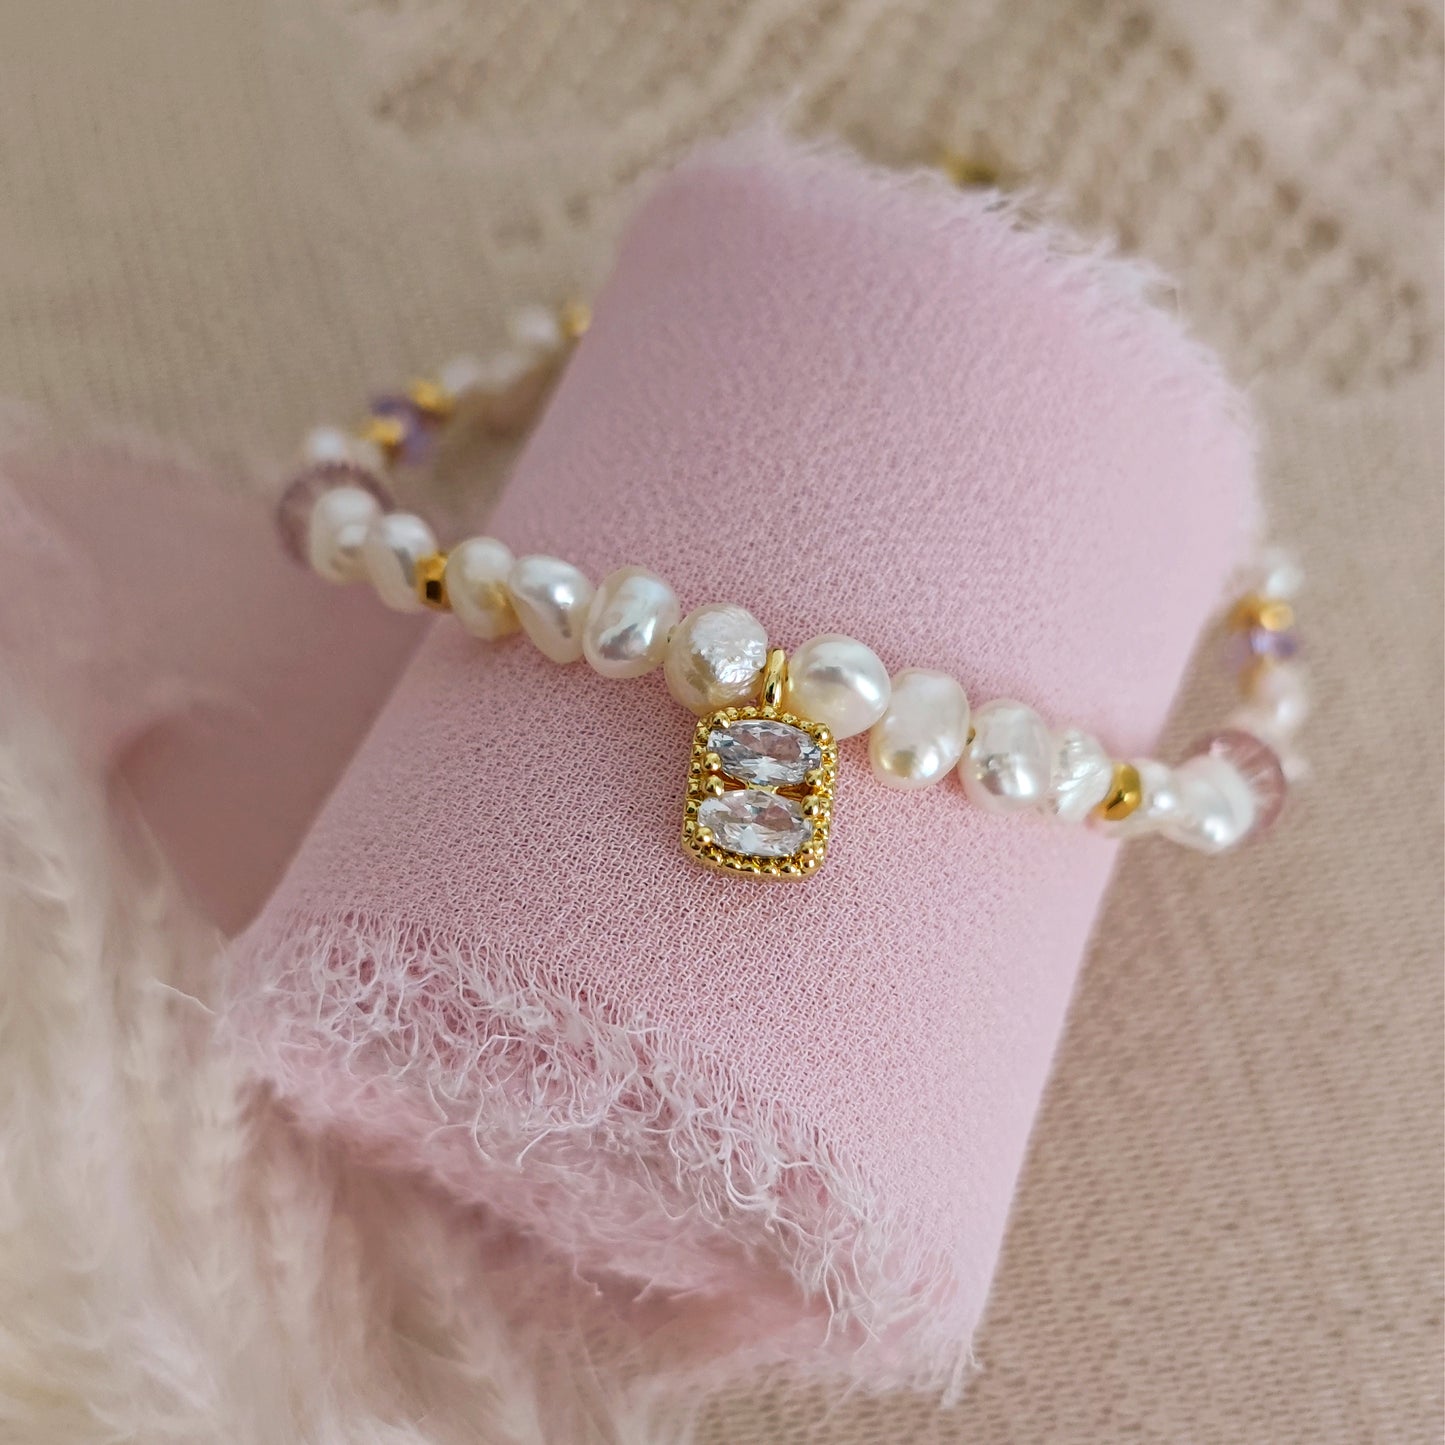 Bracelet with freshwater pearls, lilac crystals and cubic zirconia // SEBILLE